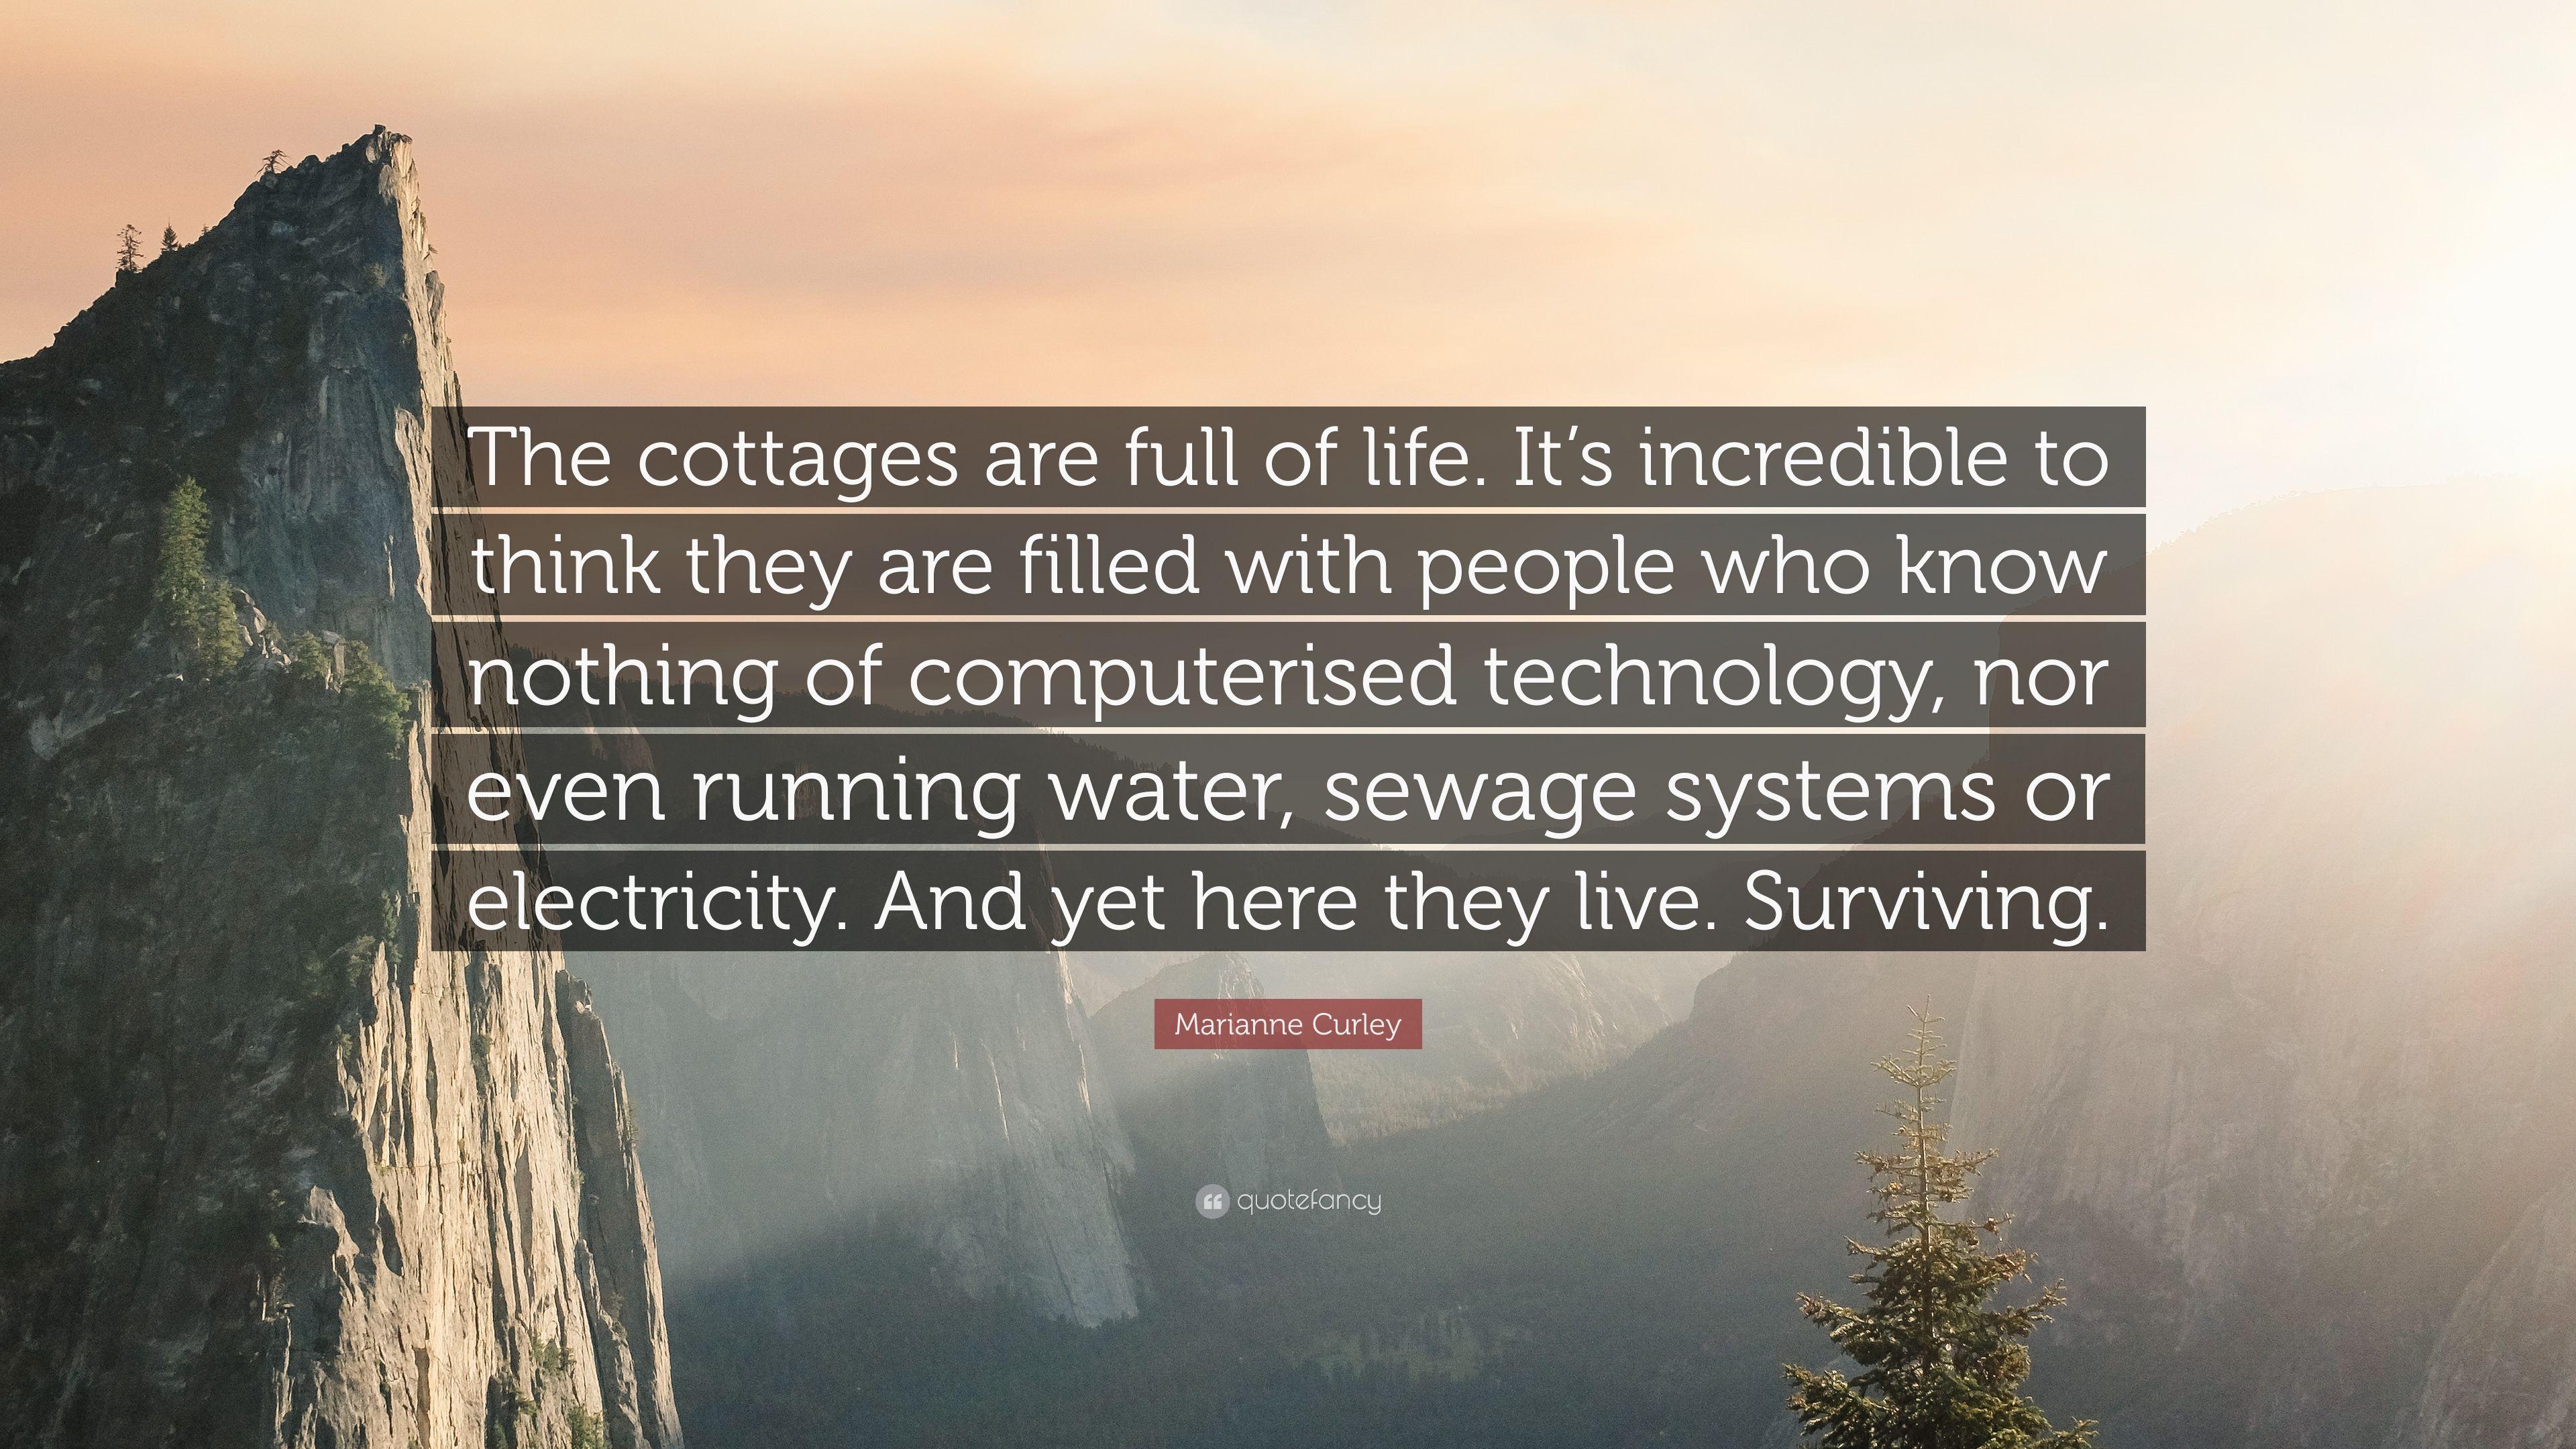 Marianne Curley Quote: “The cottages are full of life. It's